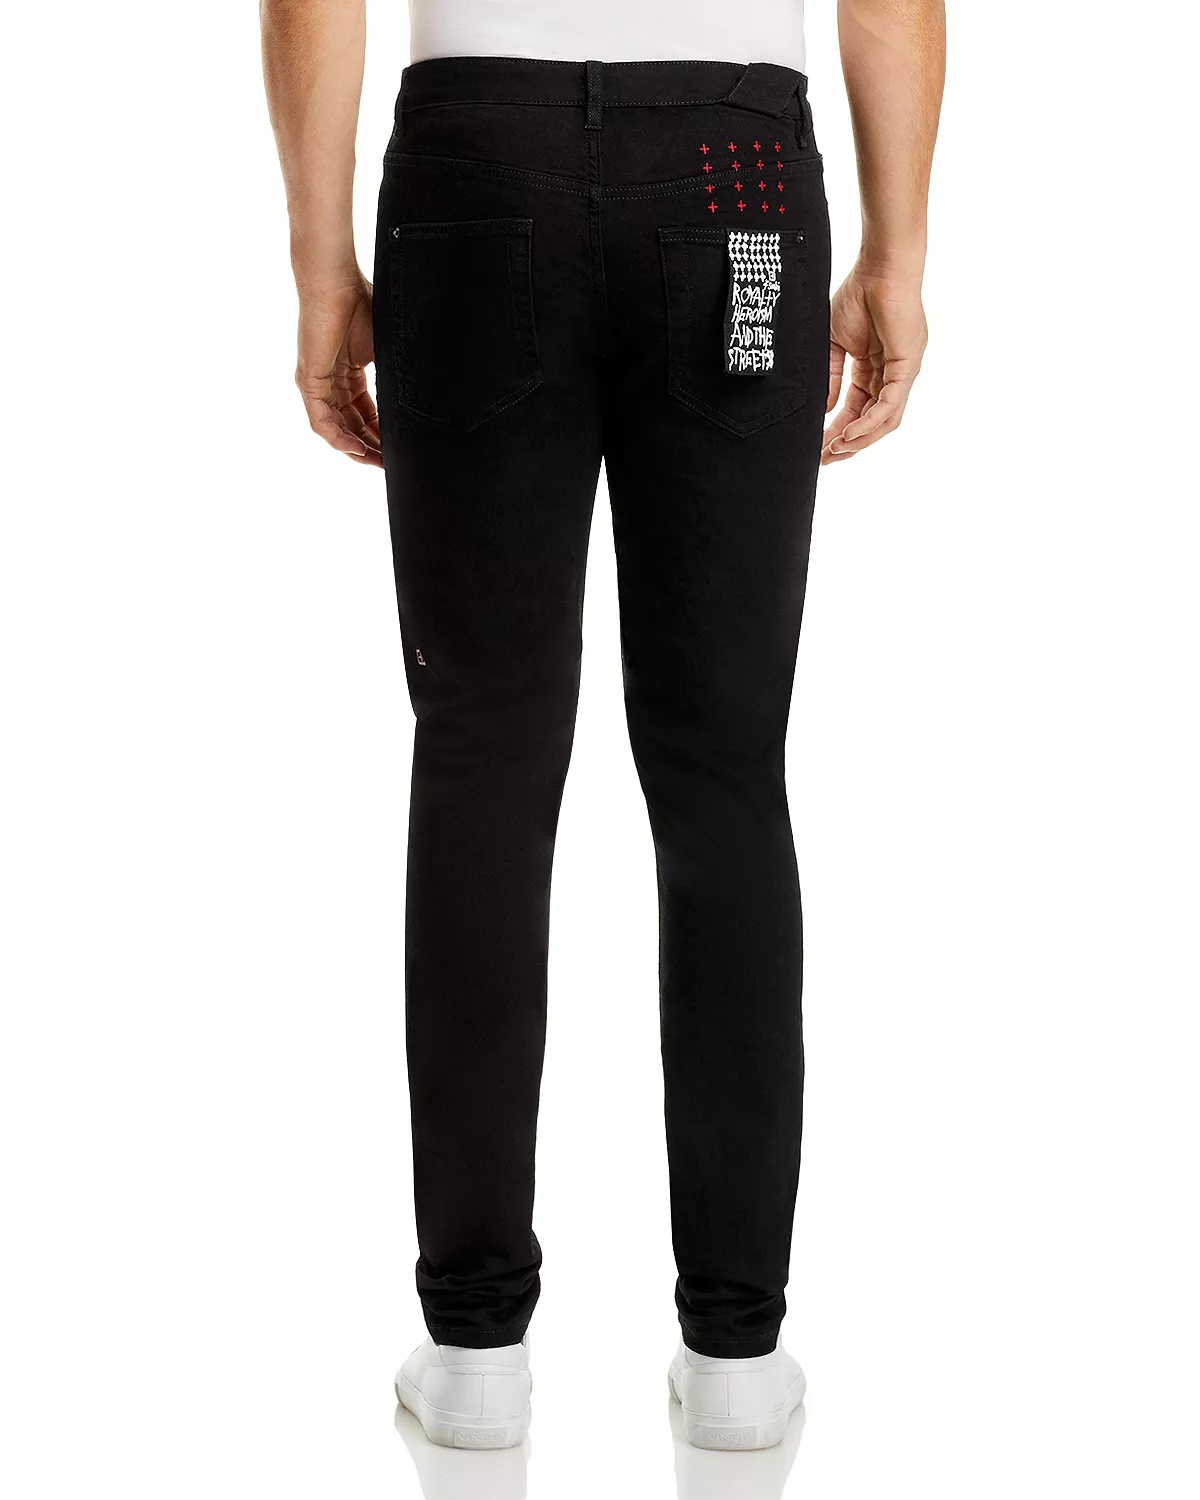 Chitch Slim Fit Jeans in Laid Black - 4